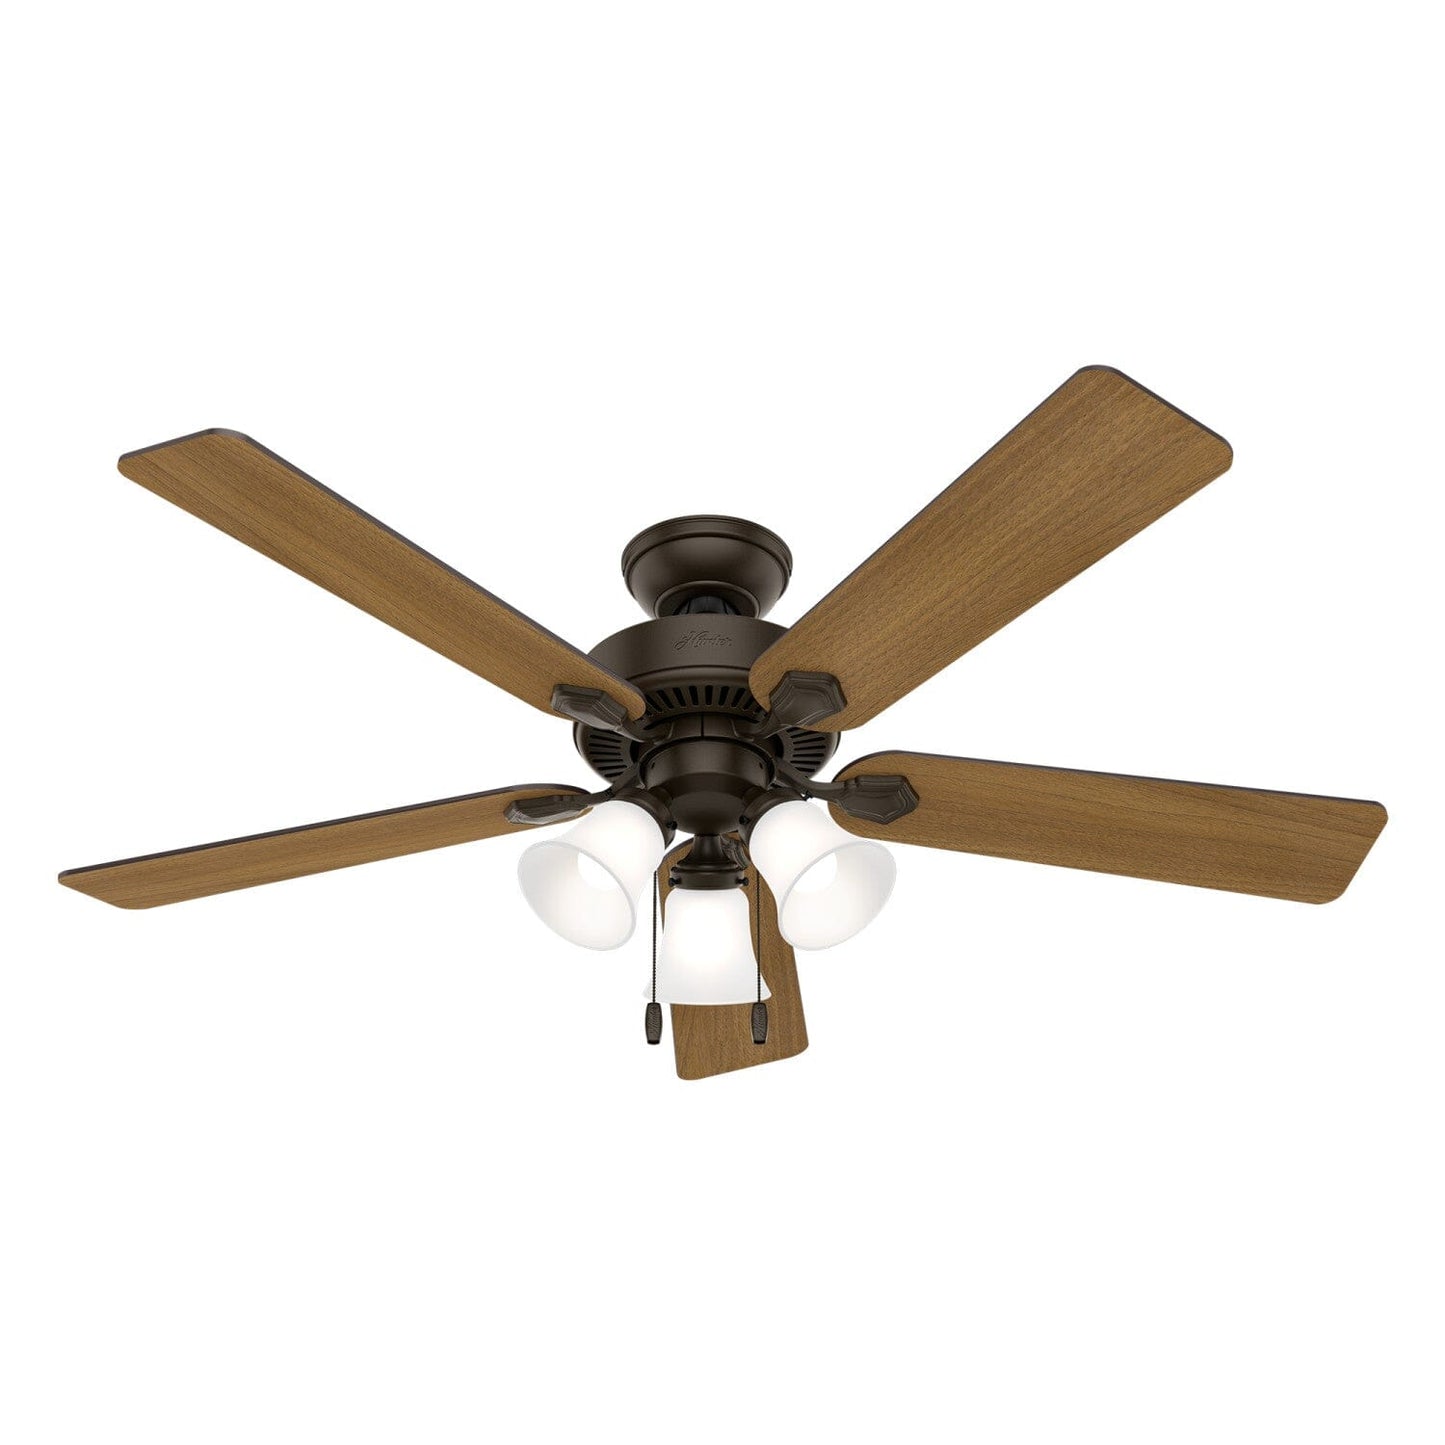 Swanson with LED Light 52 inch Ceiling Fans Hunter New Bronze - American Walnut 